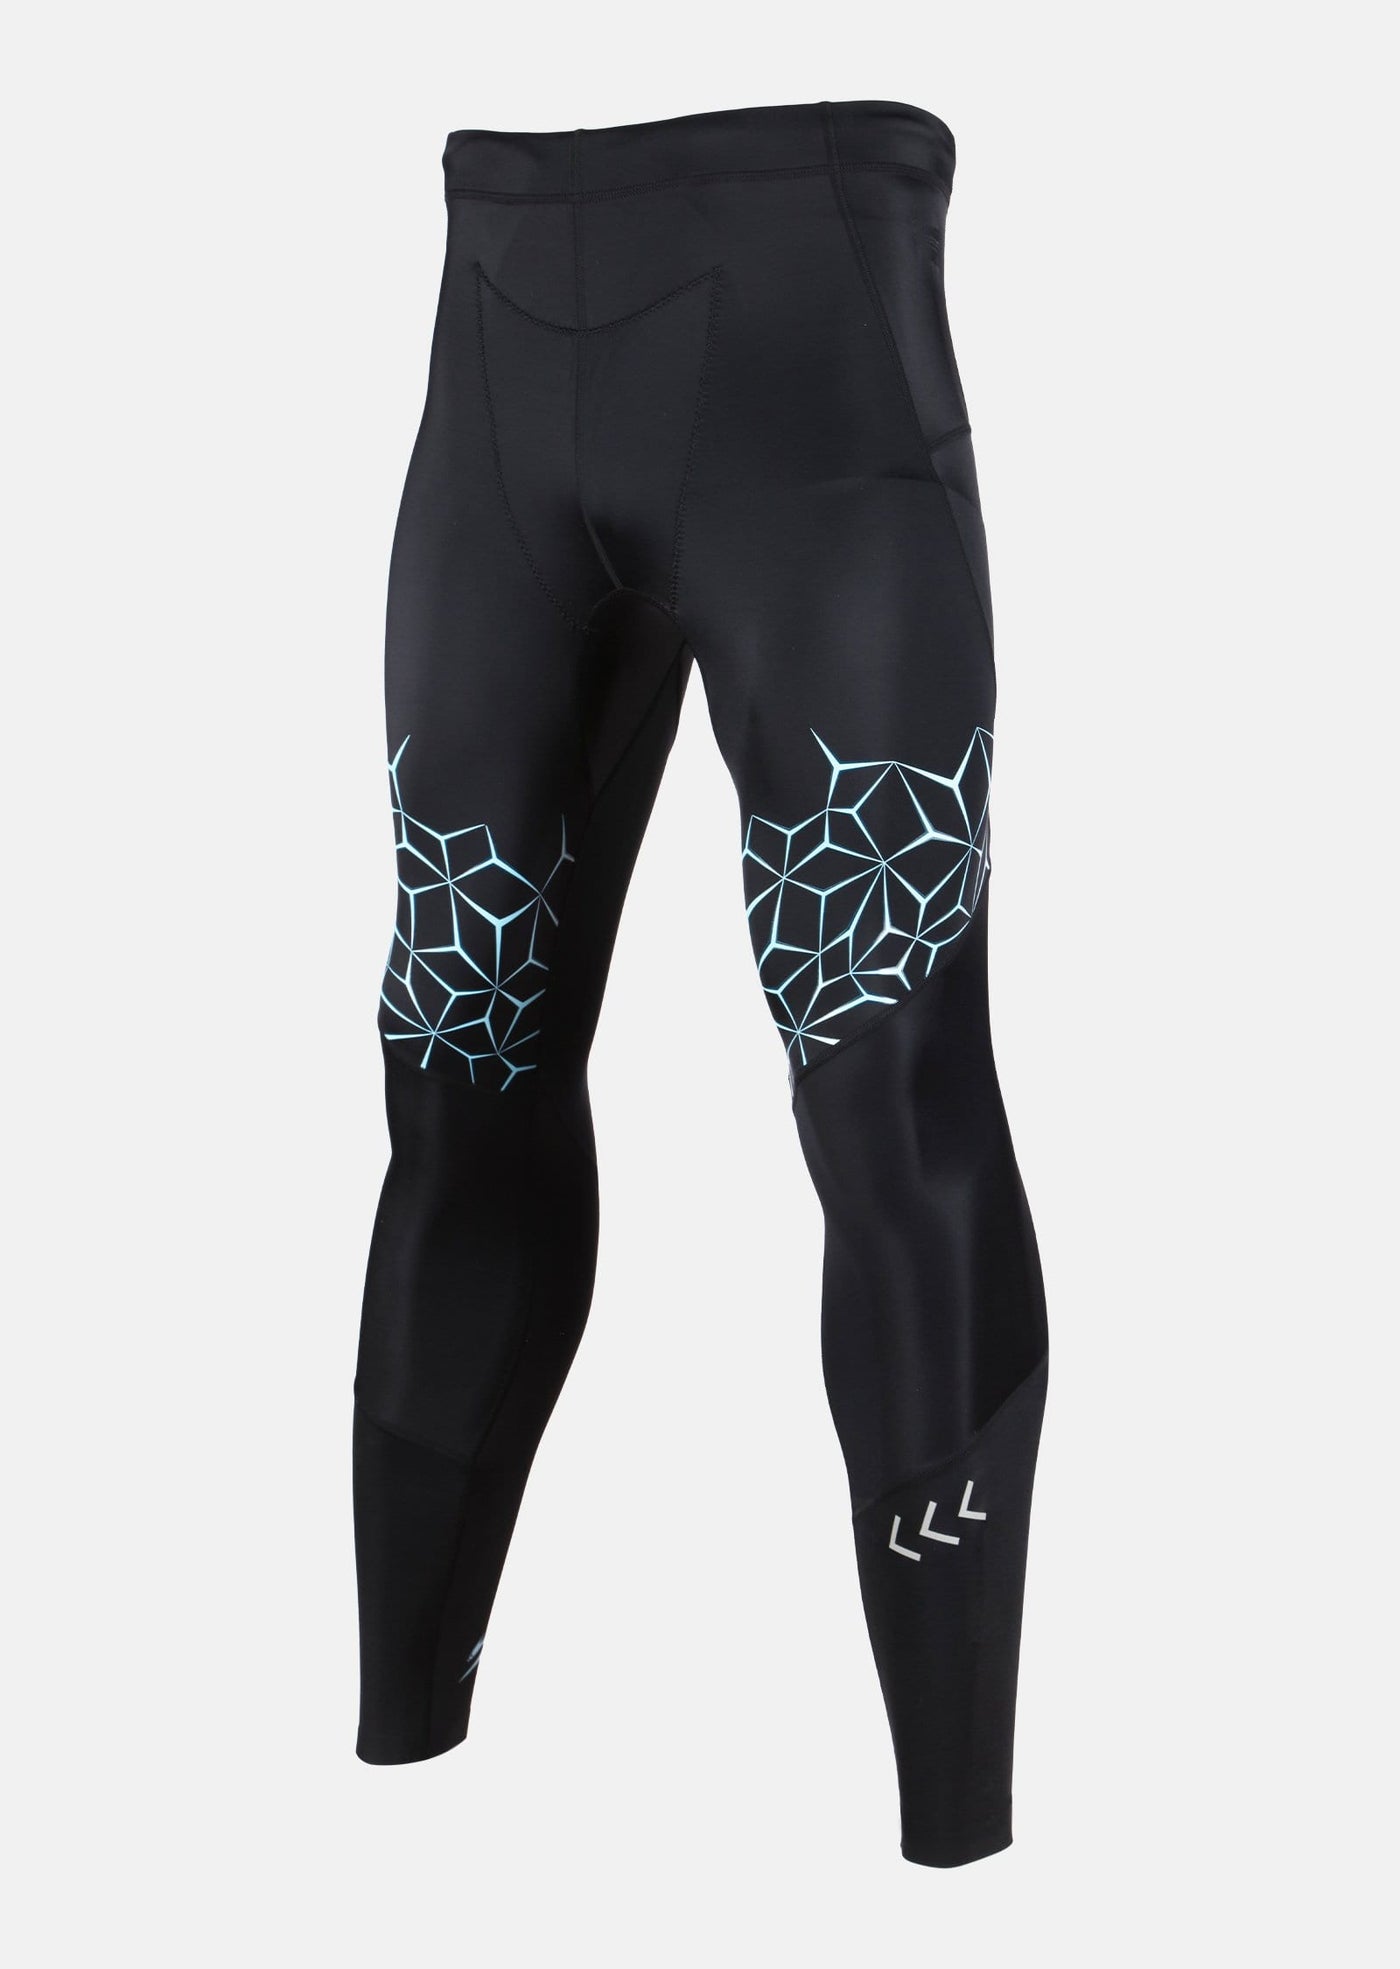 Best 7/8 Compression Leggings For Men  International Society of Precision  Agriculture